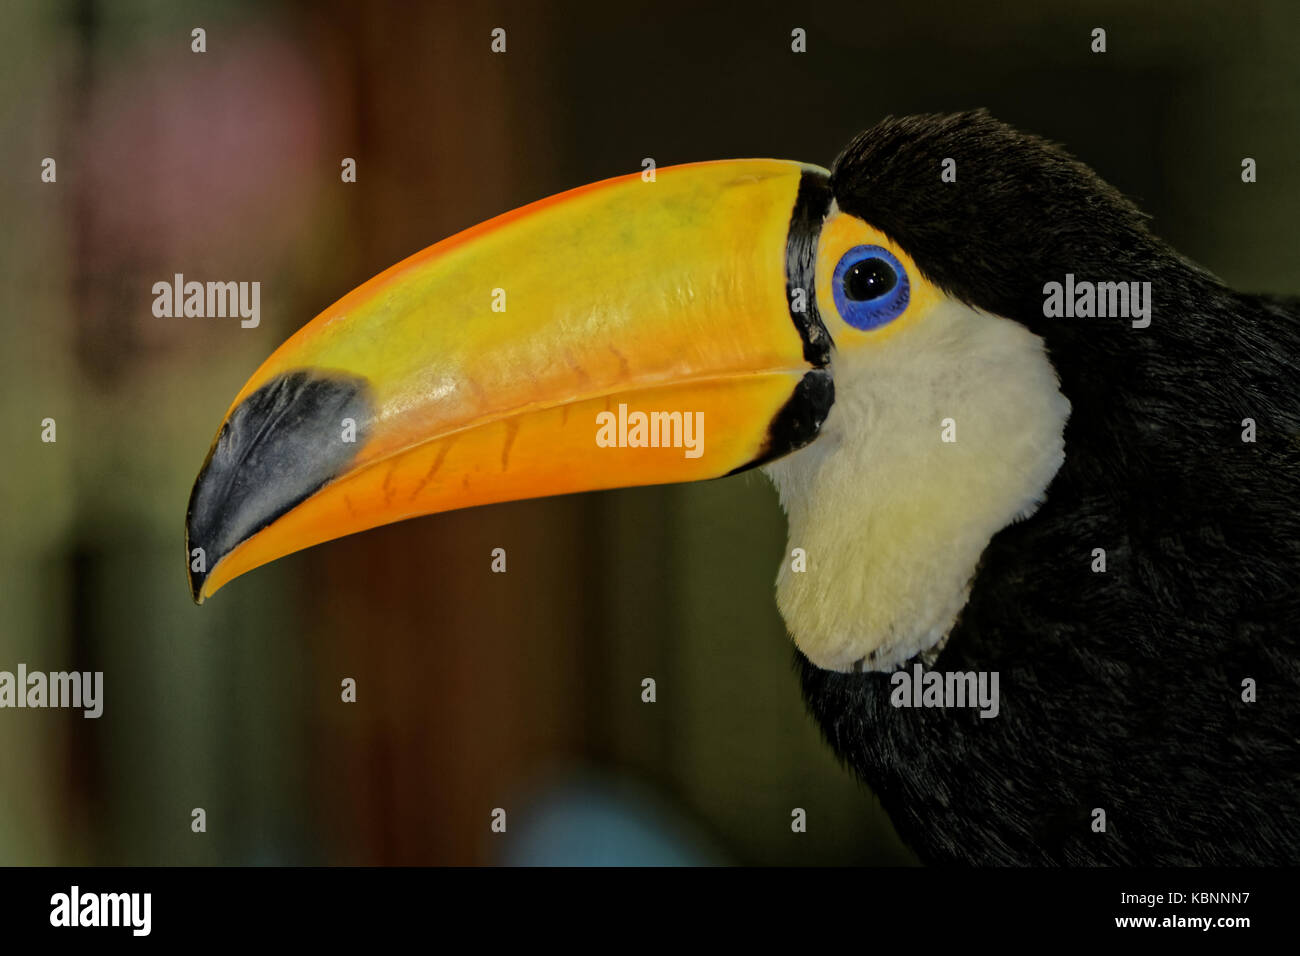 Toucan portrait showing beak and head with blurred background Stock Photo